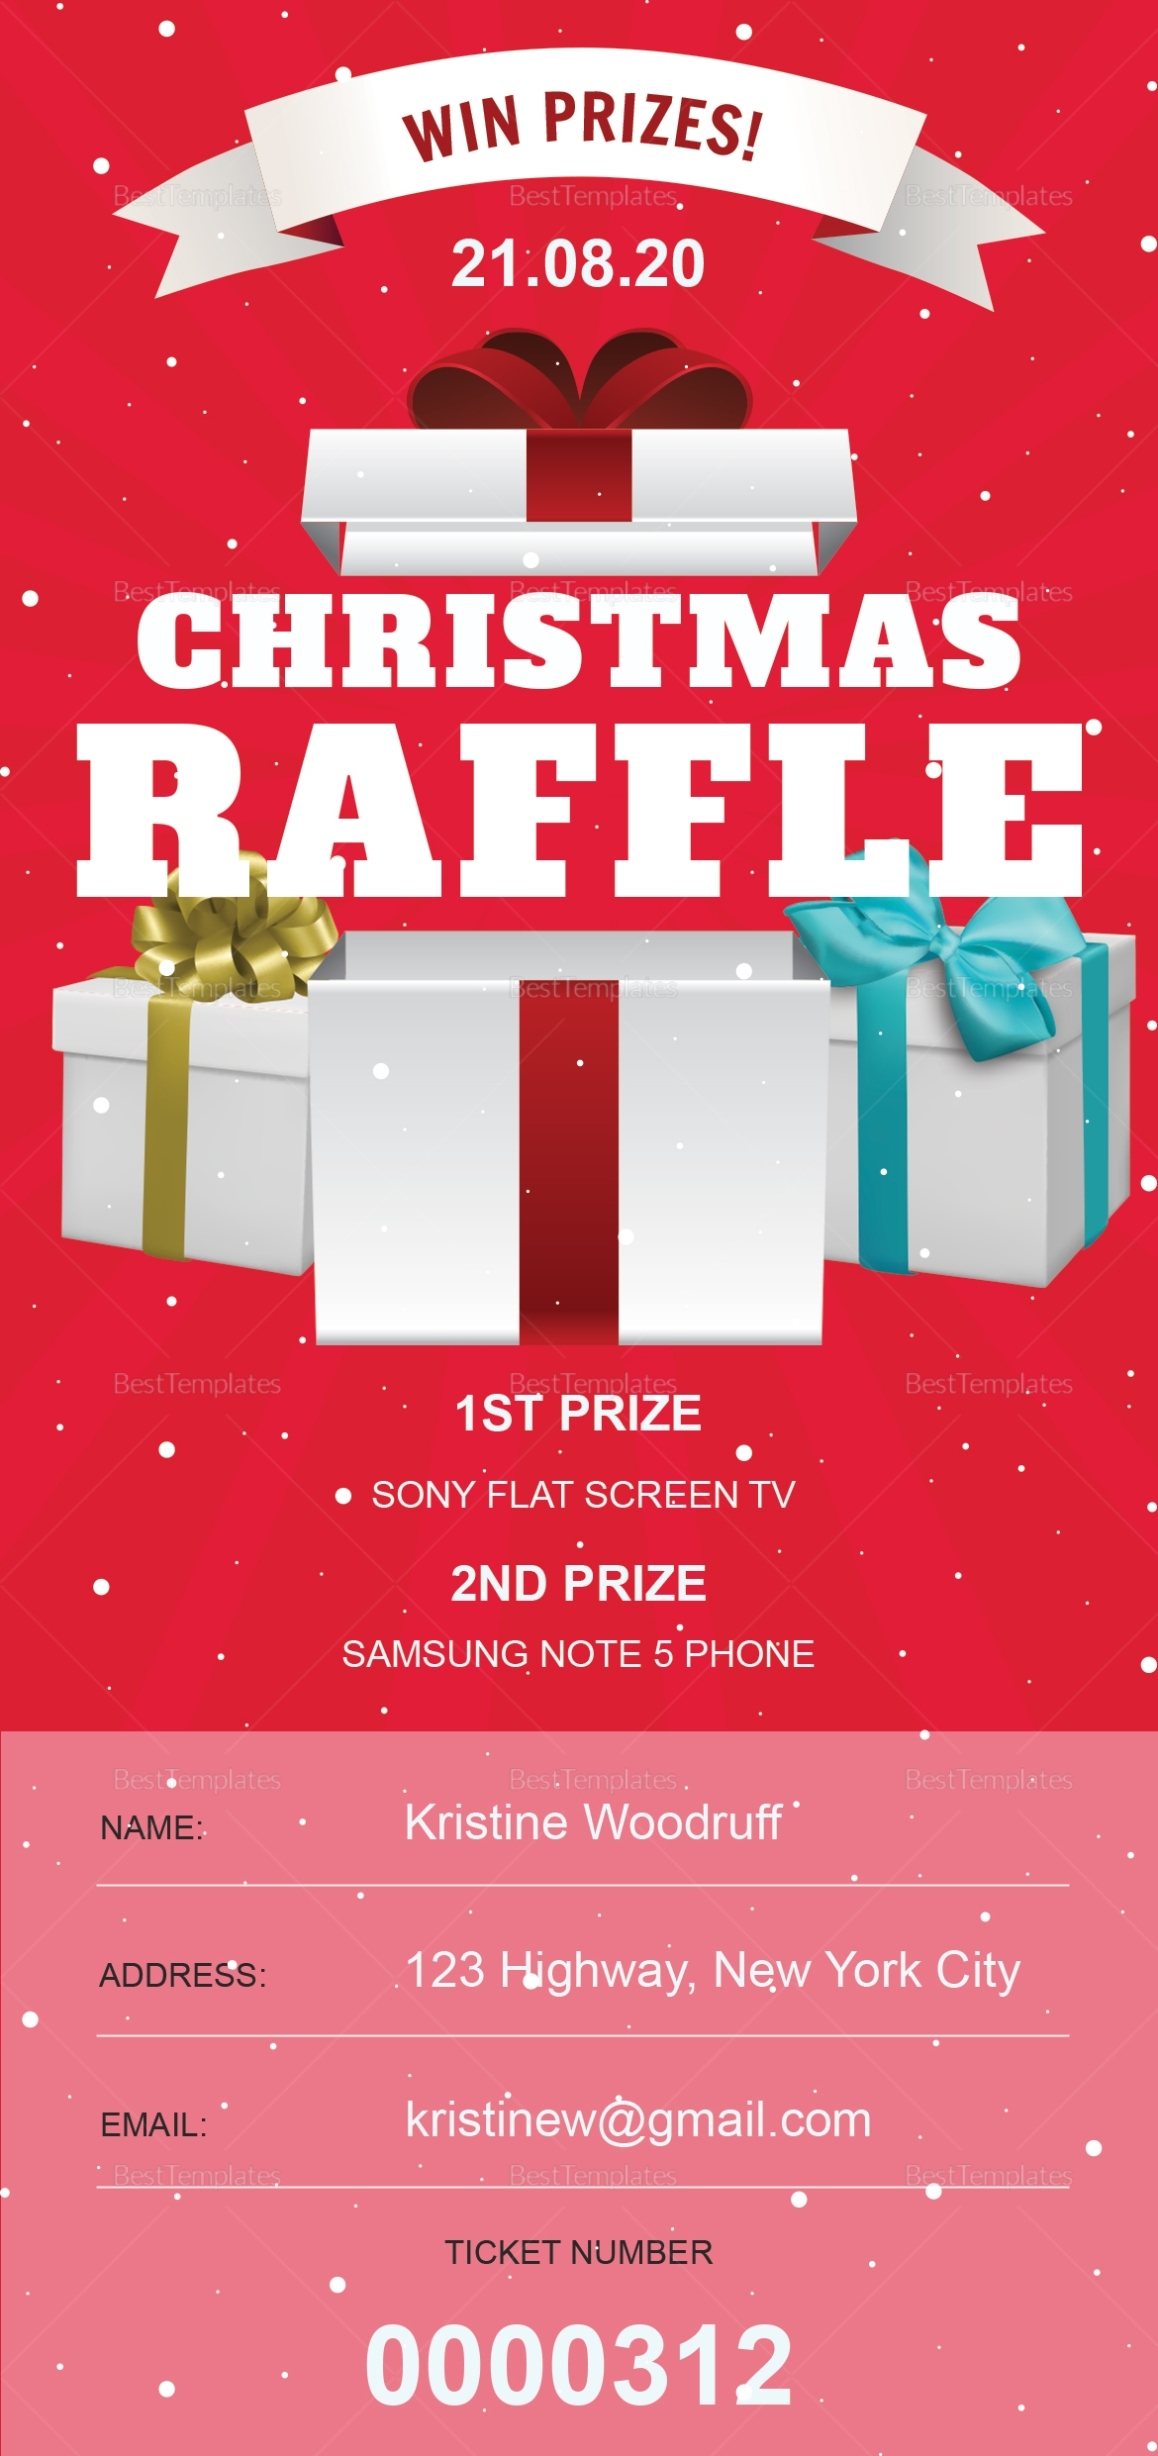 Christmas Raffle Ticket Design Template In Psd, Word, Publisher, Illustrator, Indesign Within Raffle Flyer Template Free